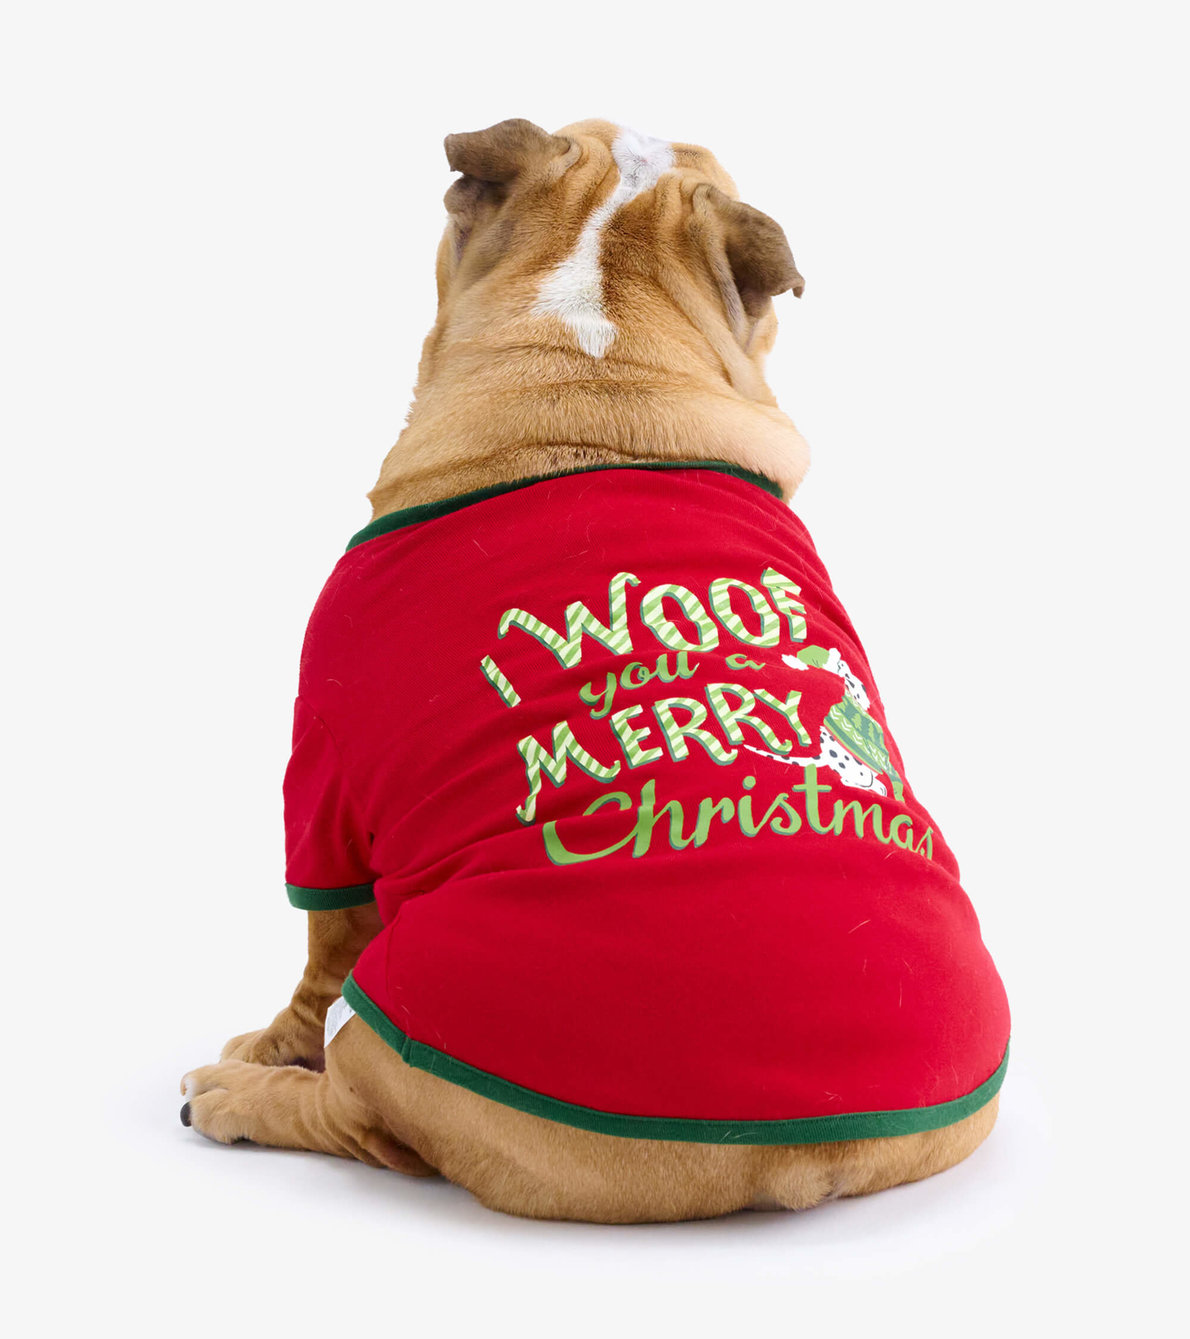 View larger image of Woofing Christmas Dog Tee